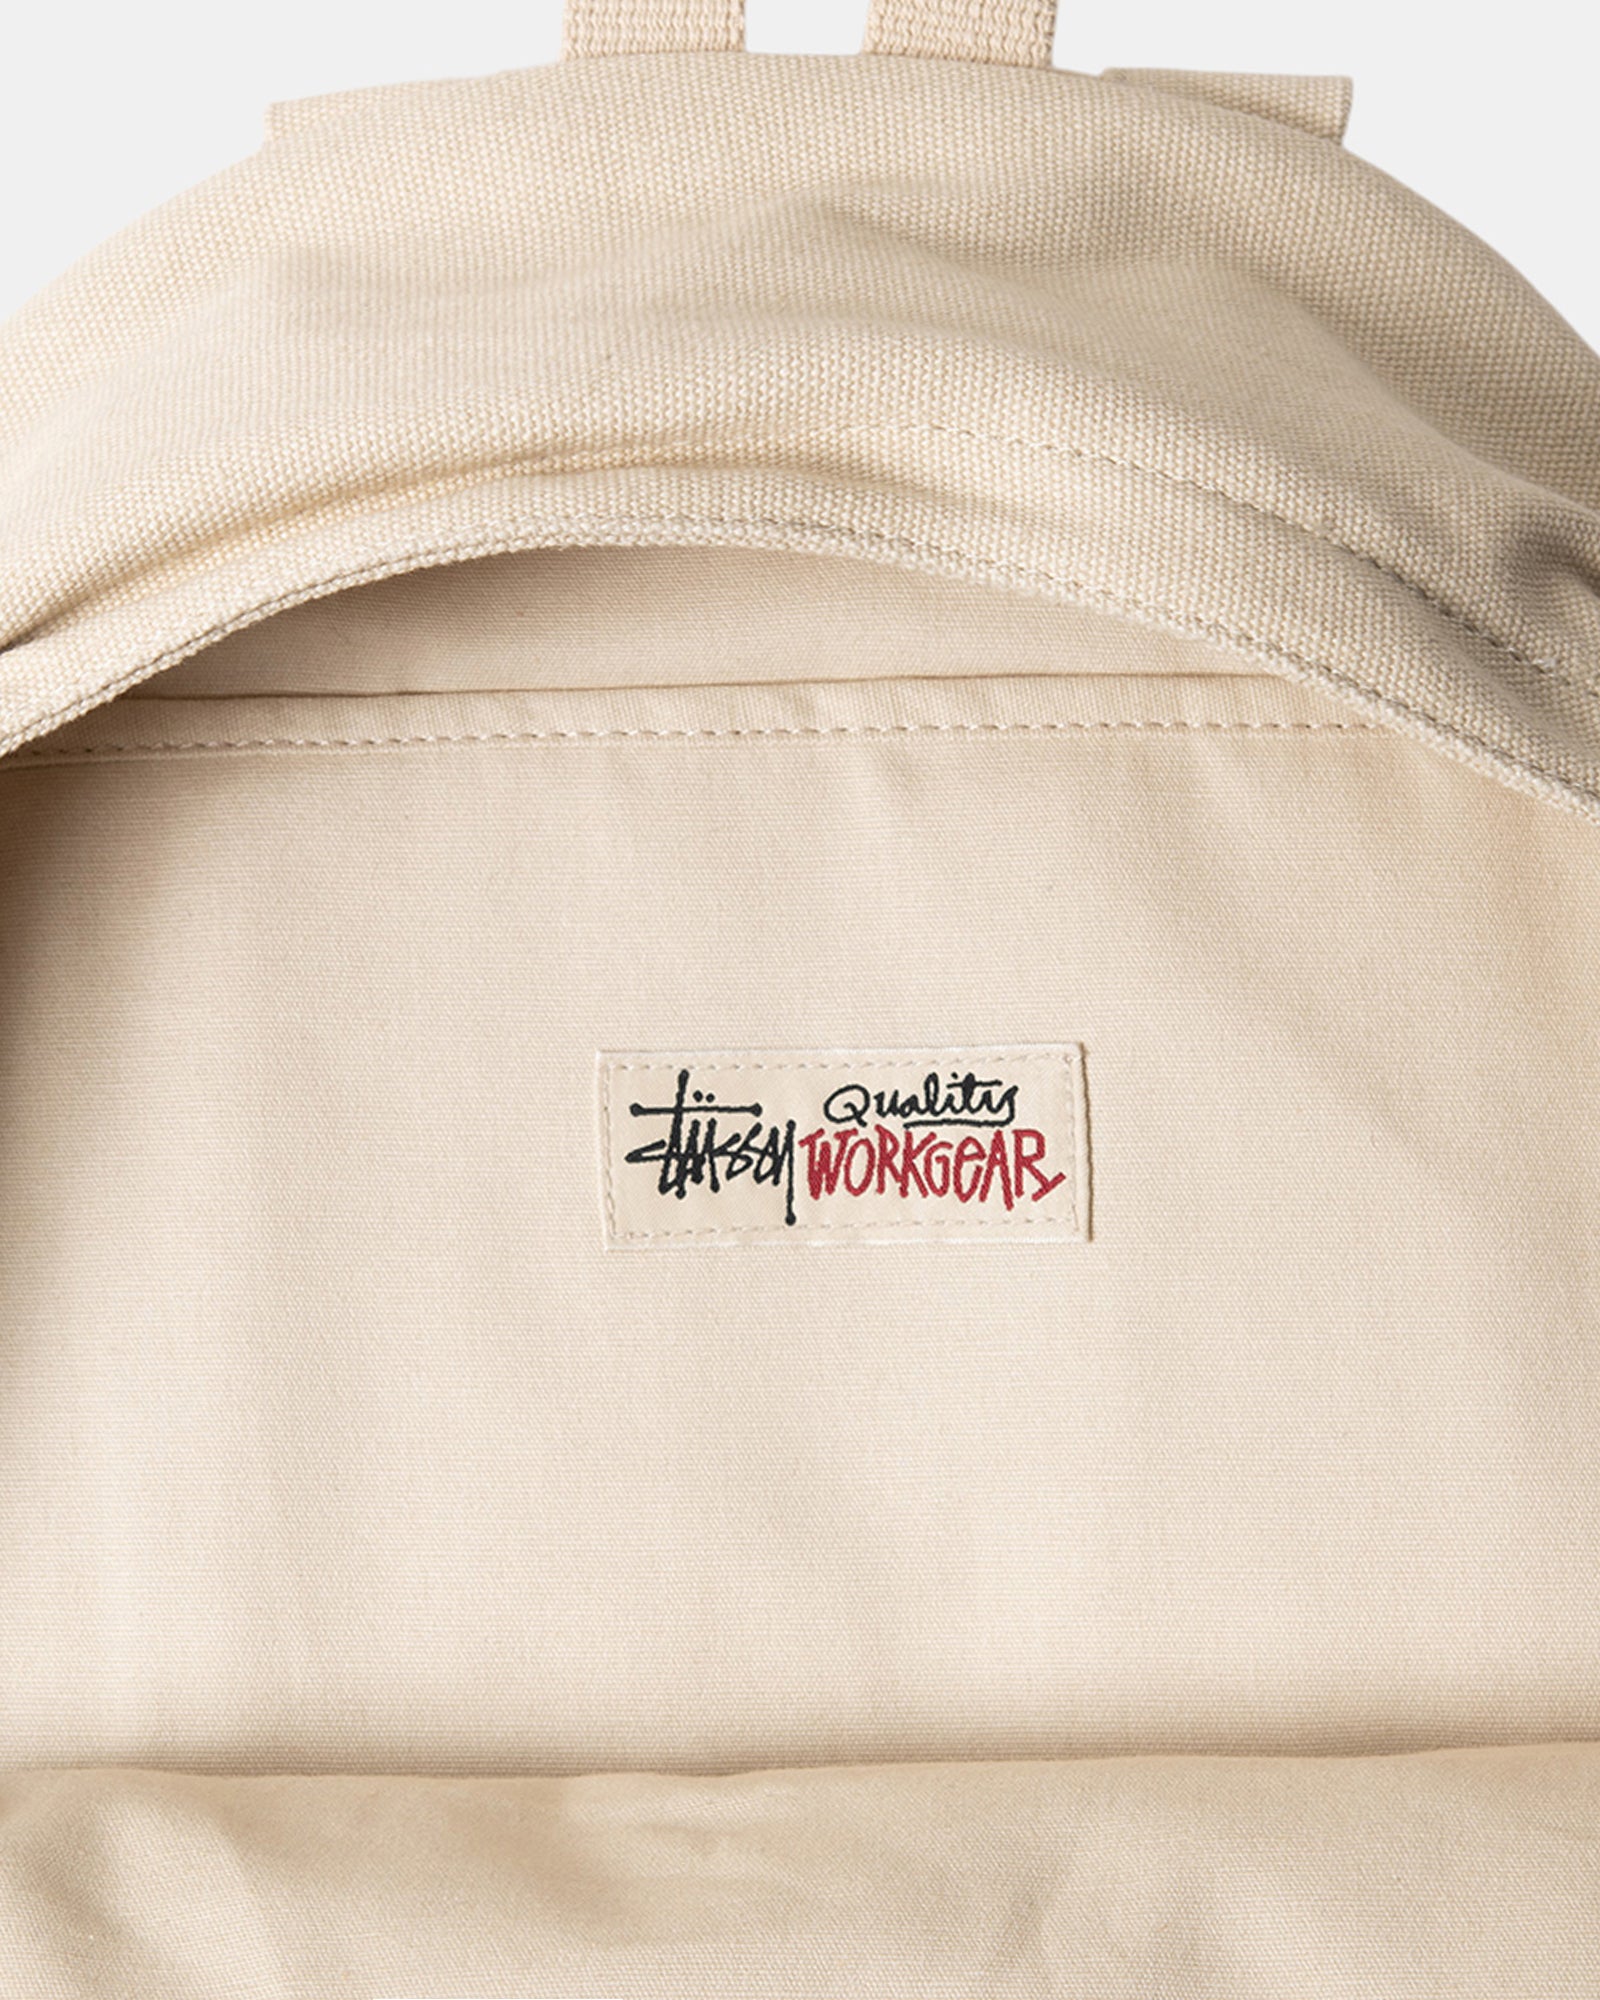 Stüssy Canvas Backpack Natural Accessory Accessory